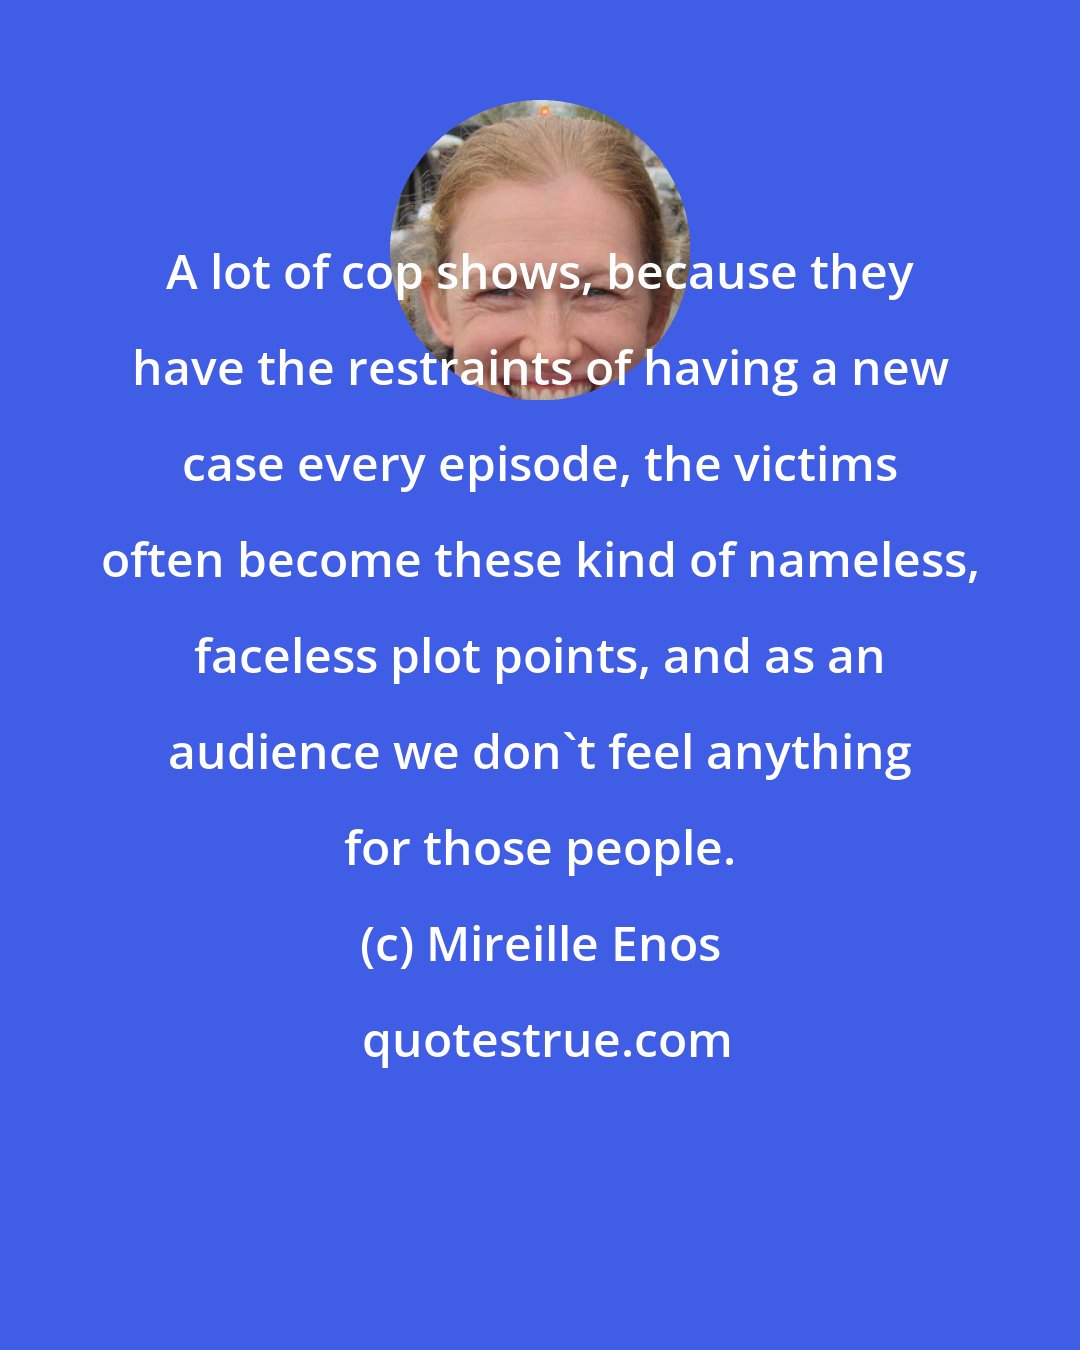 Mireille Enos: A lot of cop shows, because they have the restraints of having a new case every episode, the victims often become these kind of nameless, faceless plot points, and as an audience we don't feel anything for those people.